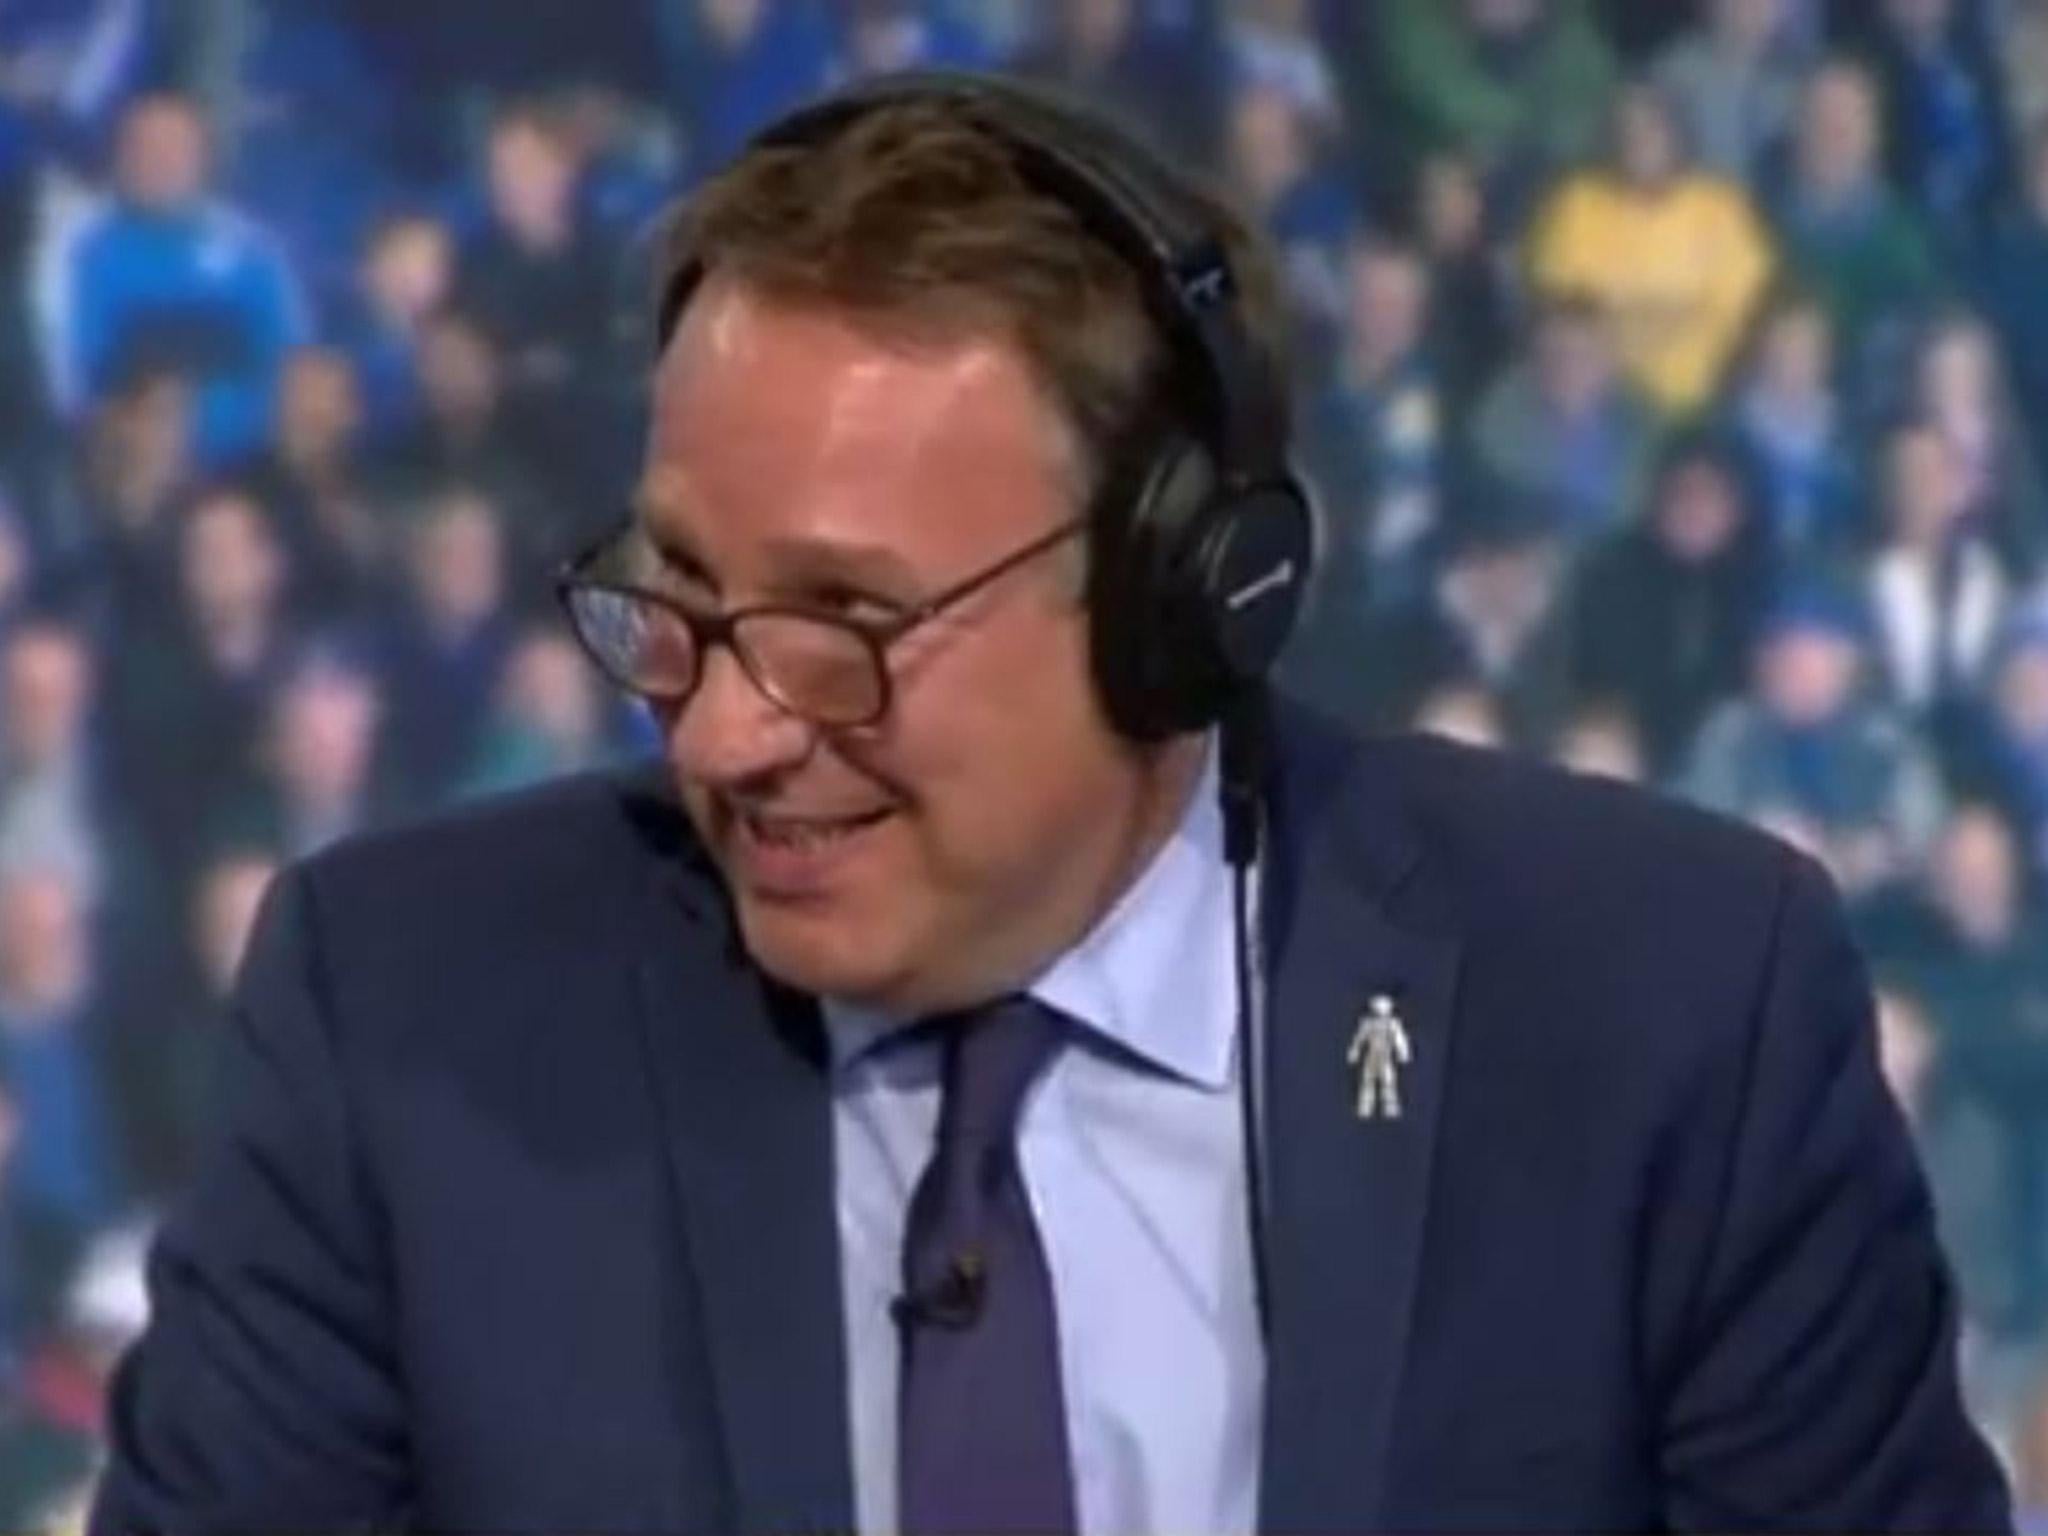 Paul Merson managed to call Islam Slimani 'salami' during Soccer Saturday